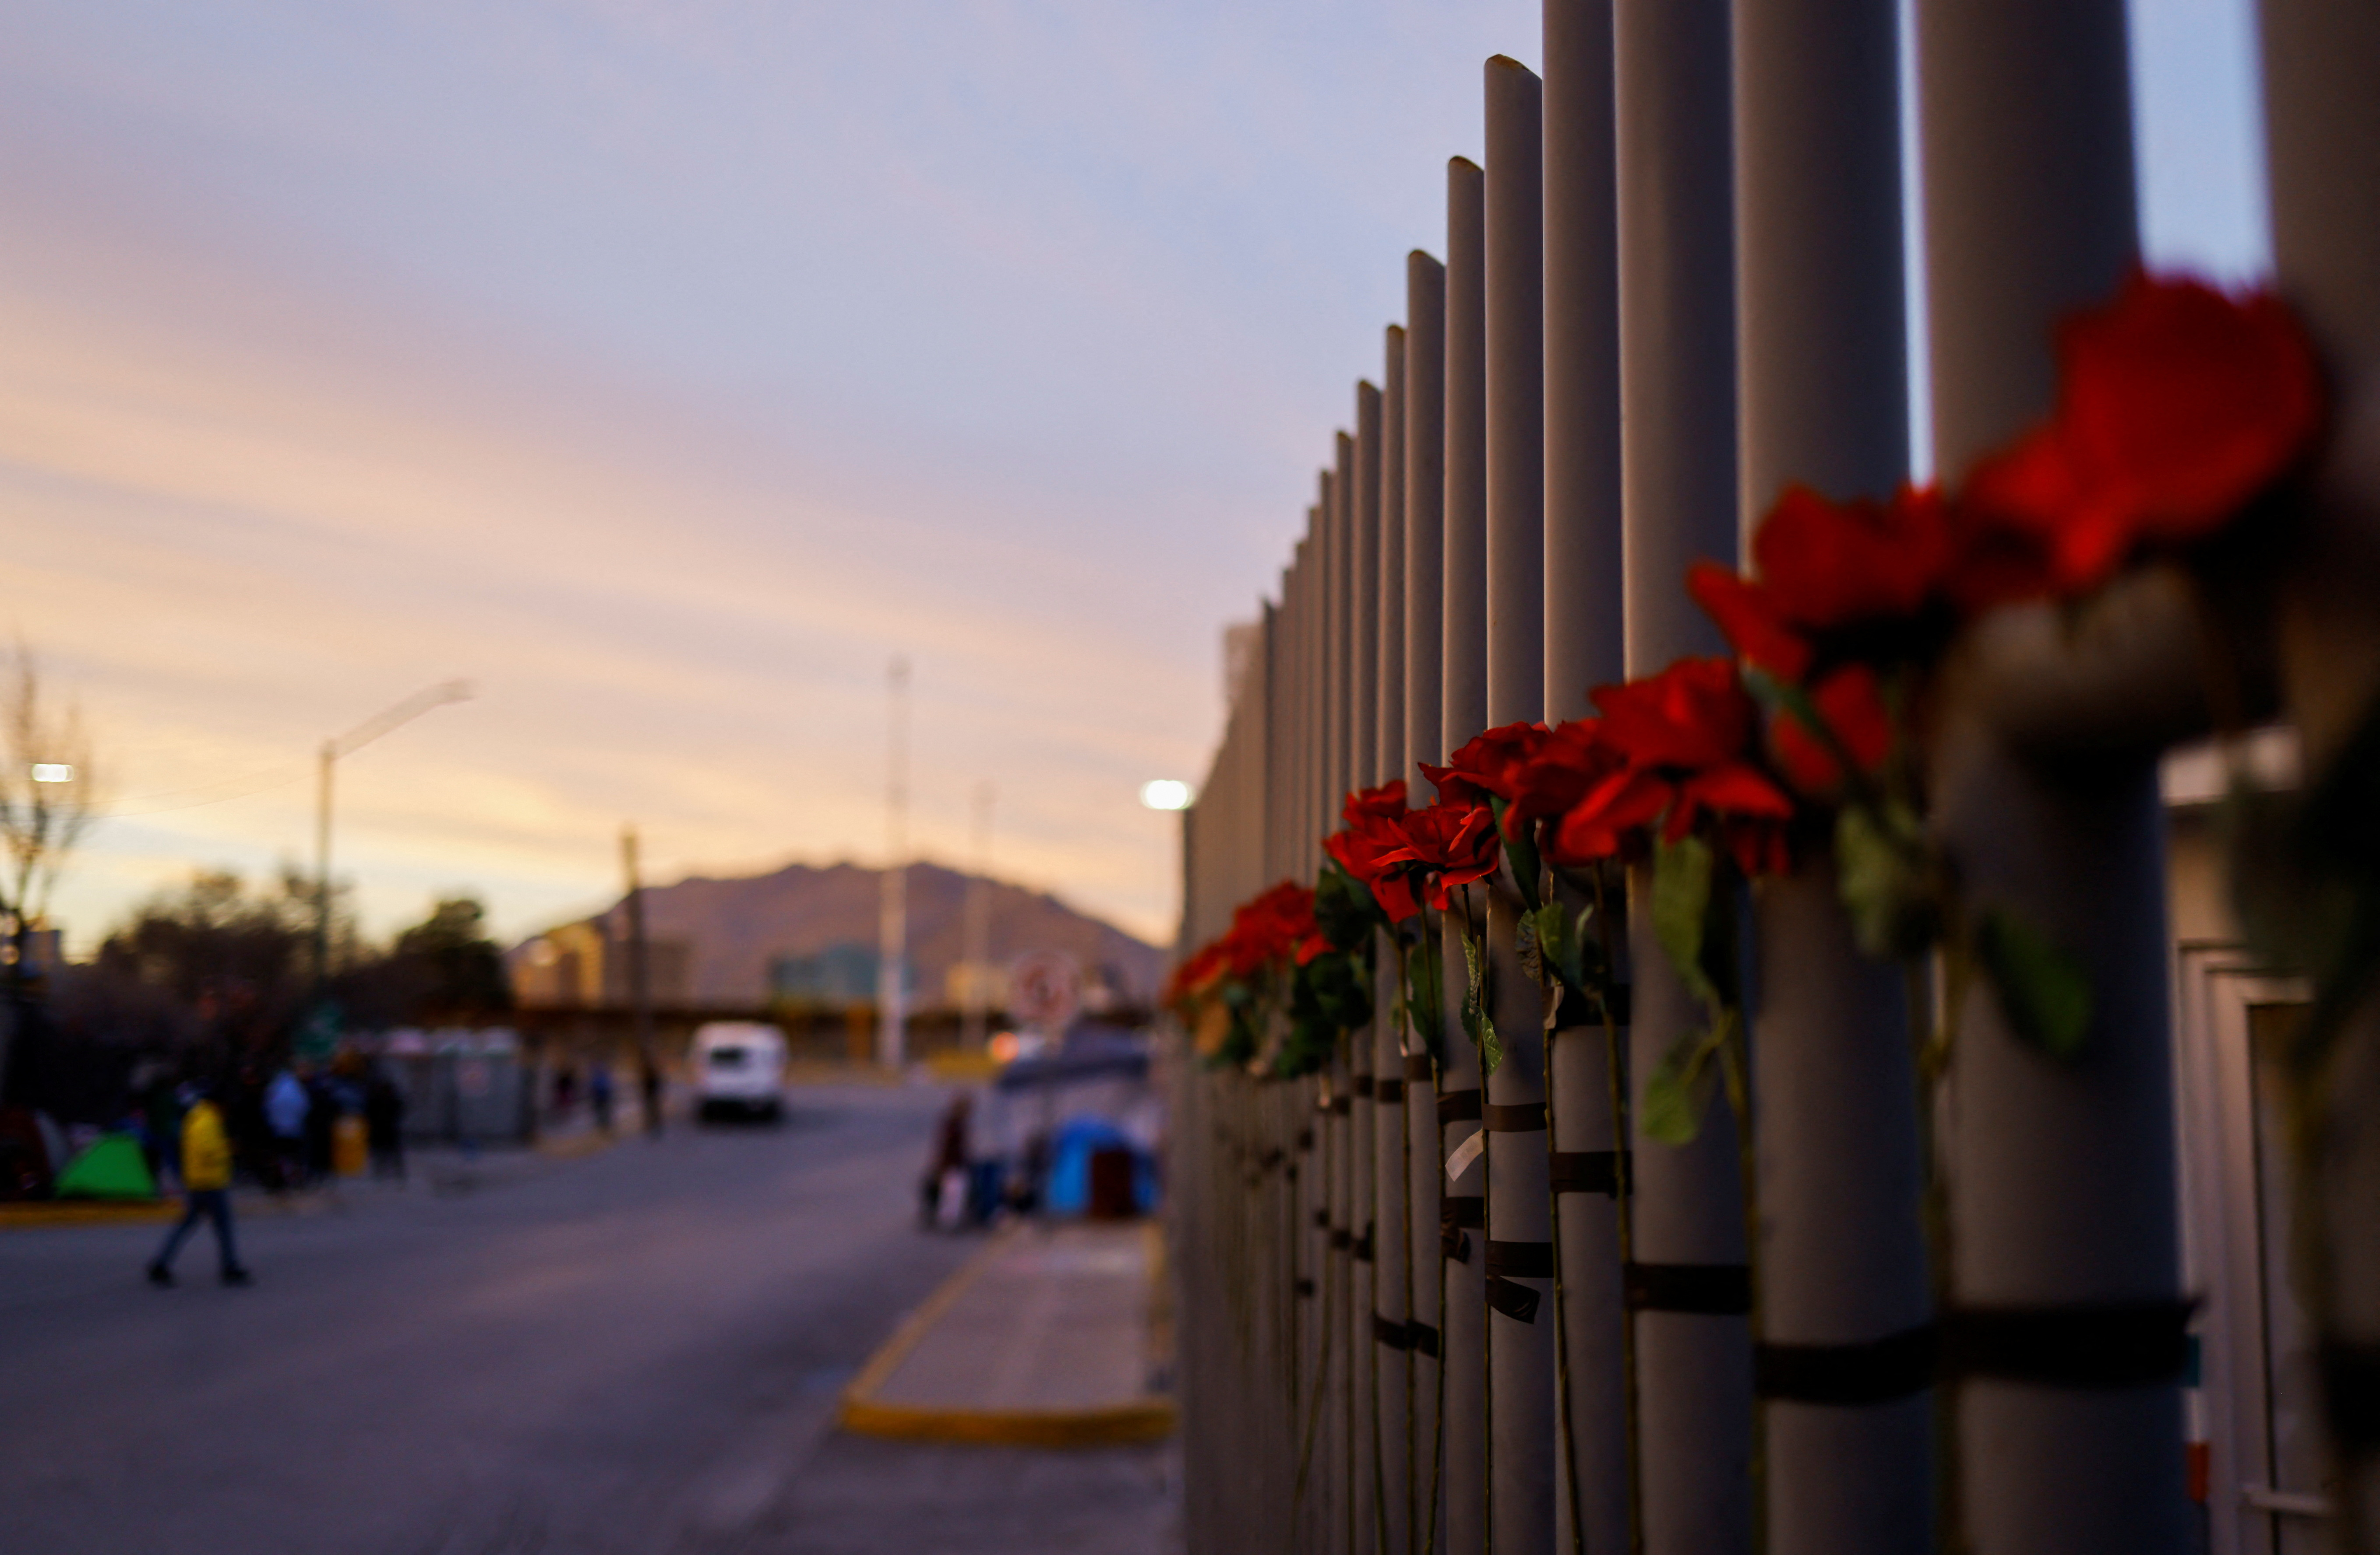 A general view of flowers on the fencing outside the immigration detention center where several migrants died after a fire broke out at the center, in Ciudad Juarez, Mexico April 5, 2023. REUTERS/Jose Luis Gonzalez